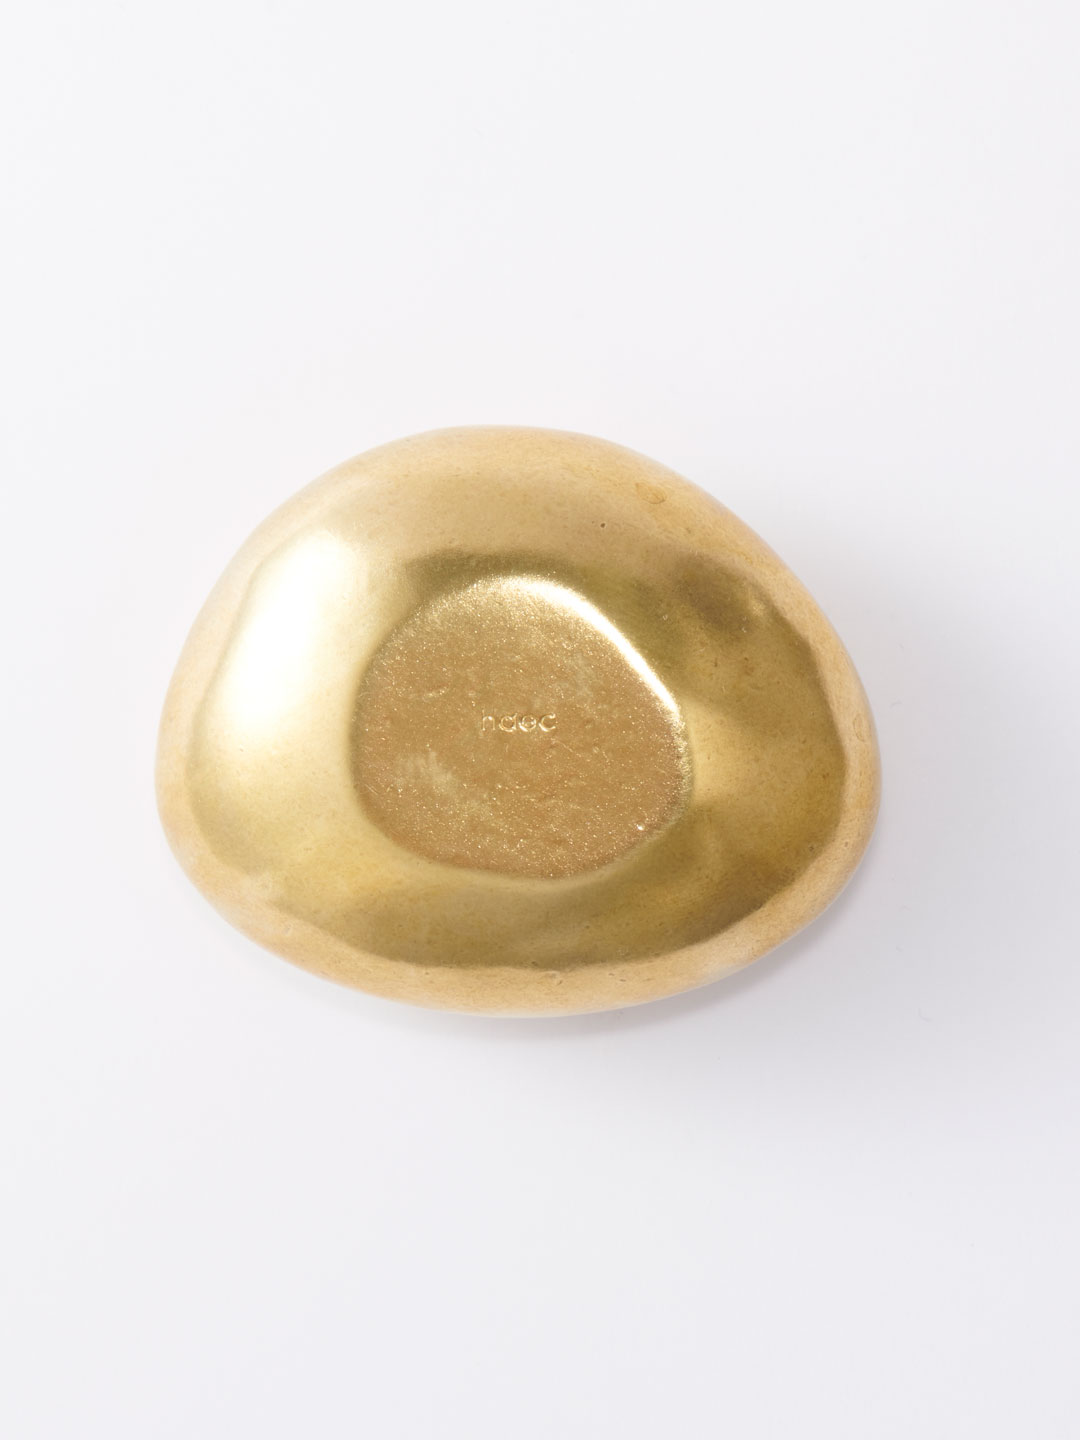 Paper Weight 002 - Gold